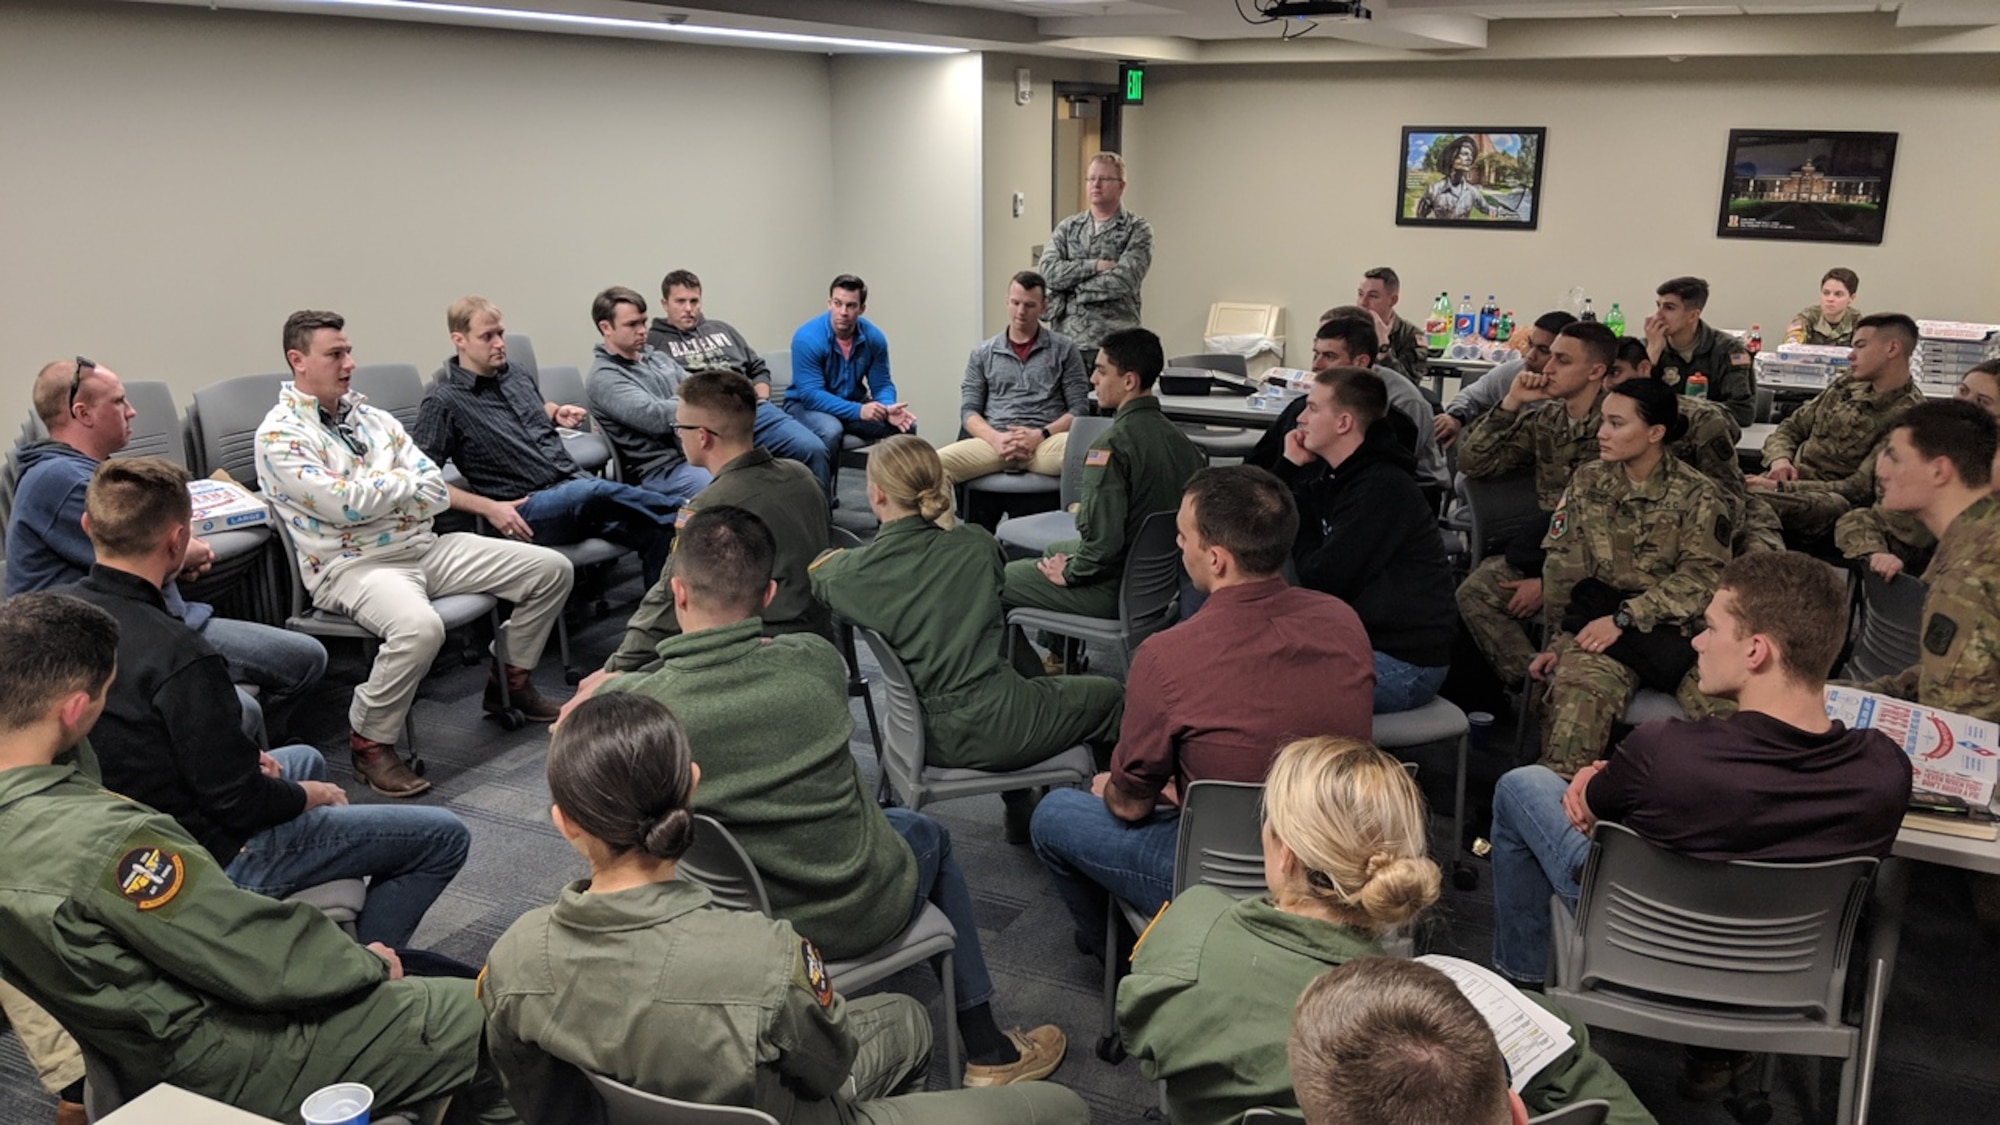 Virginia Tech Air Force ROTC Detachment 875 cadets chat with instructor pilots from the 37th and 48th Flying Training Squadrons from Columbus Air Force Base, Mississippi, Feb. 8, 2019, in Blacksburg, Virginia. The IPs hosted a social in the dorms, where cadets could ask questions about pilot life and their experiences. (Courtesy photo)